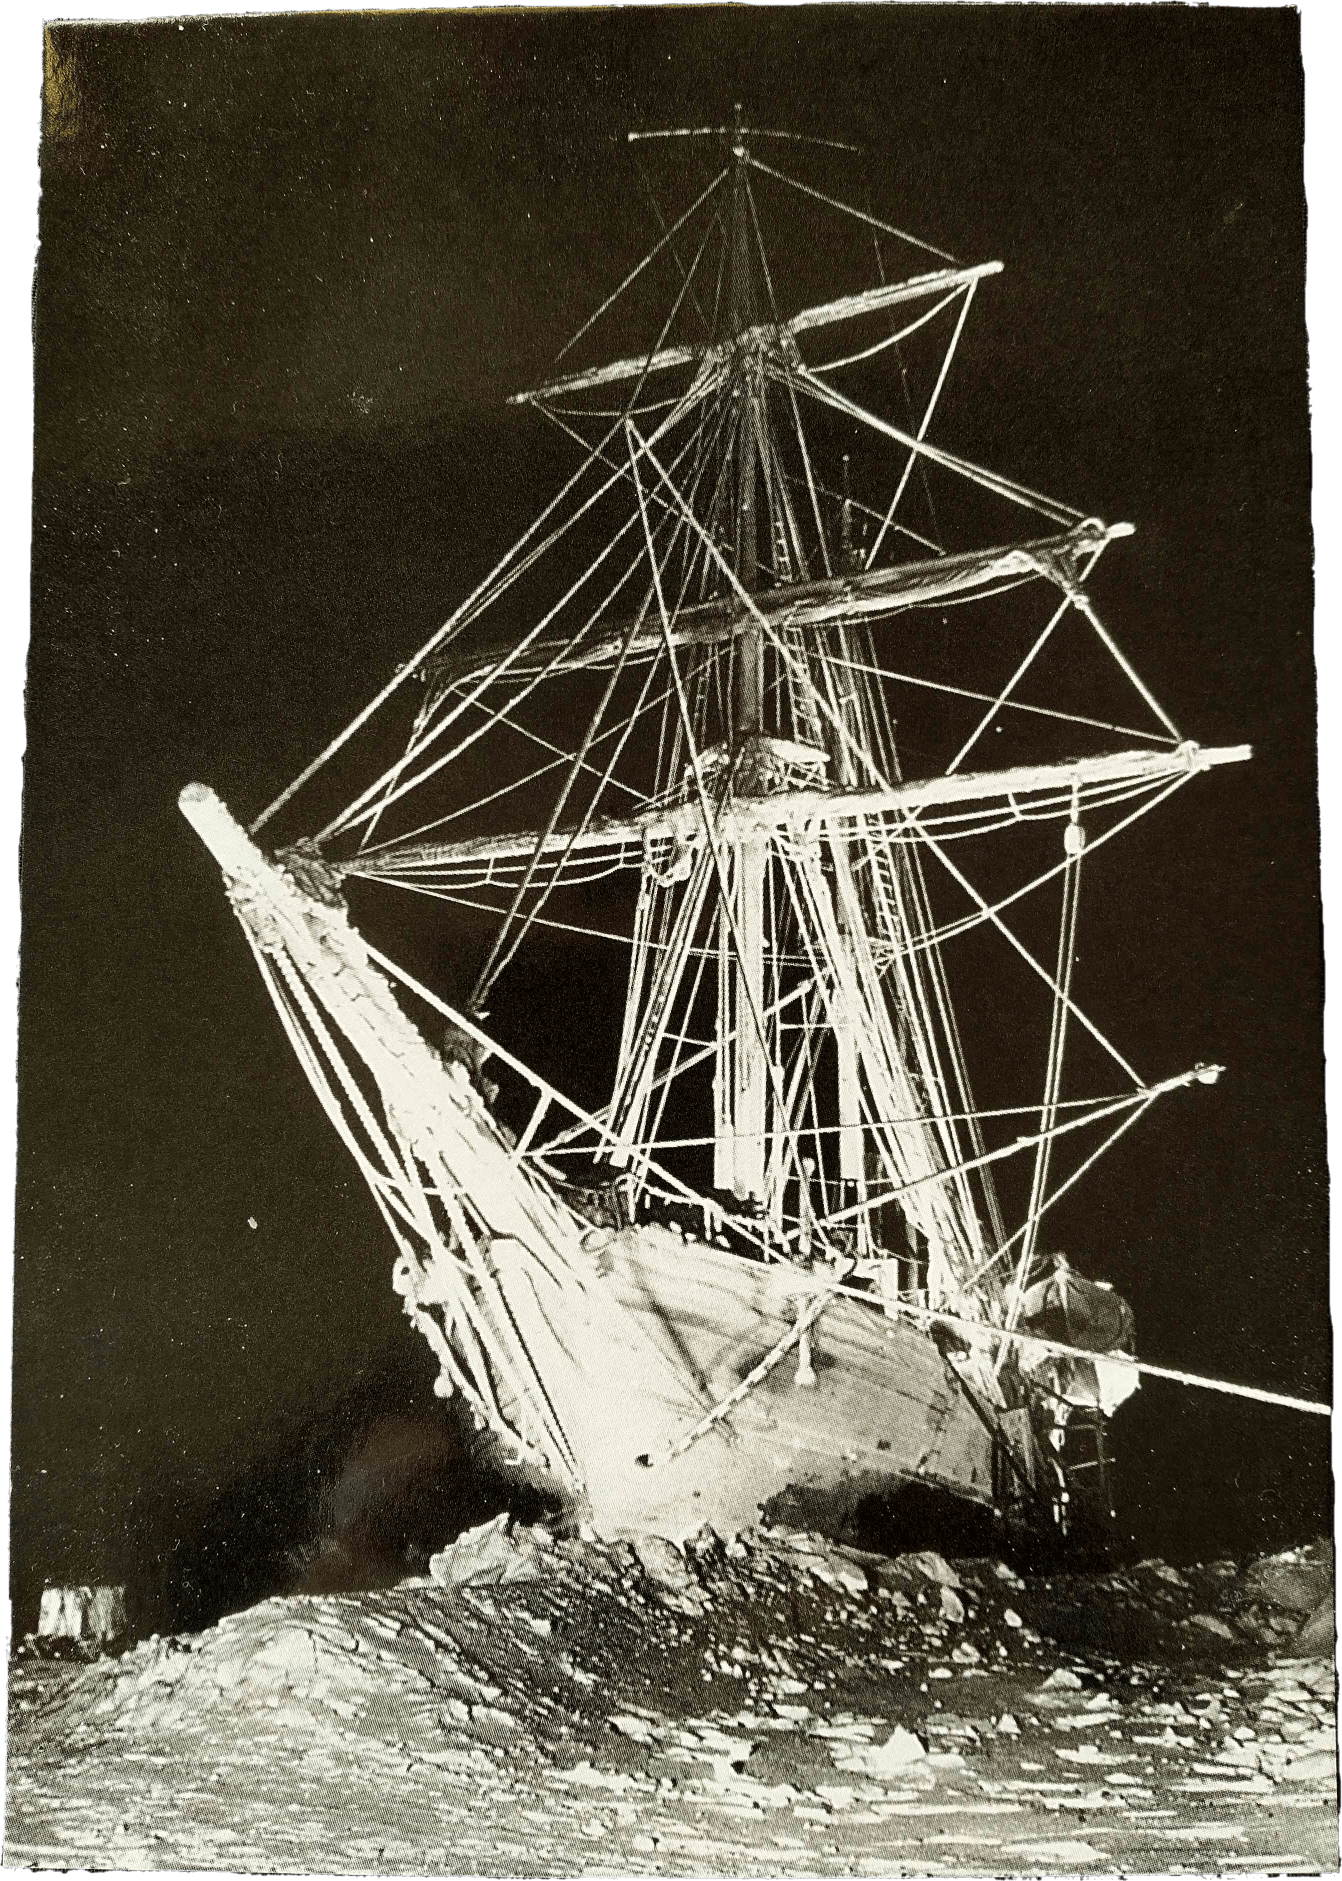 An old photograph of a ship trapped in ice